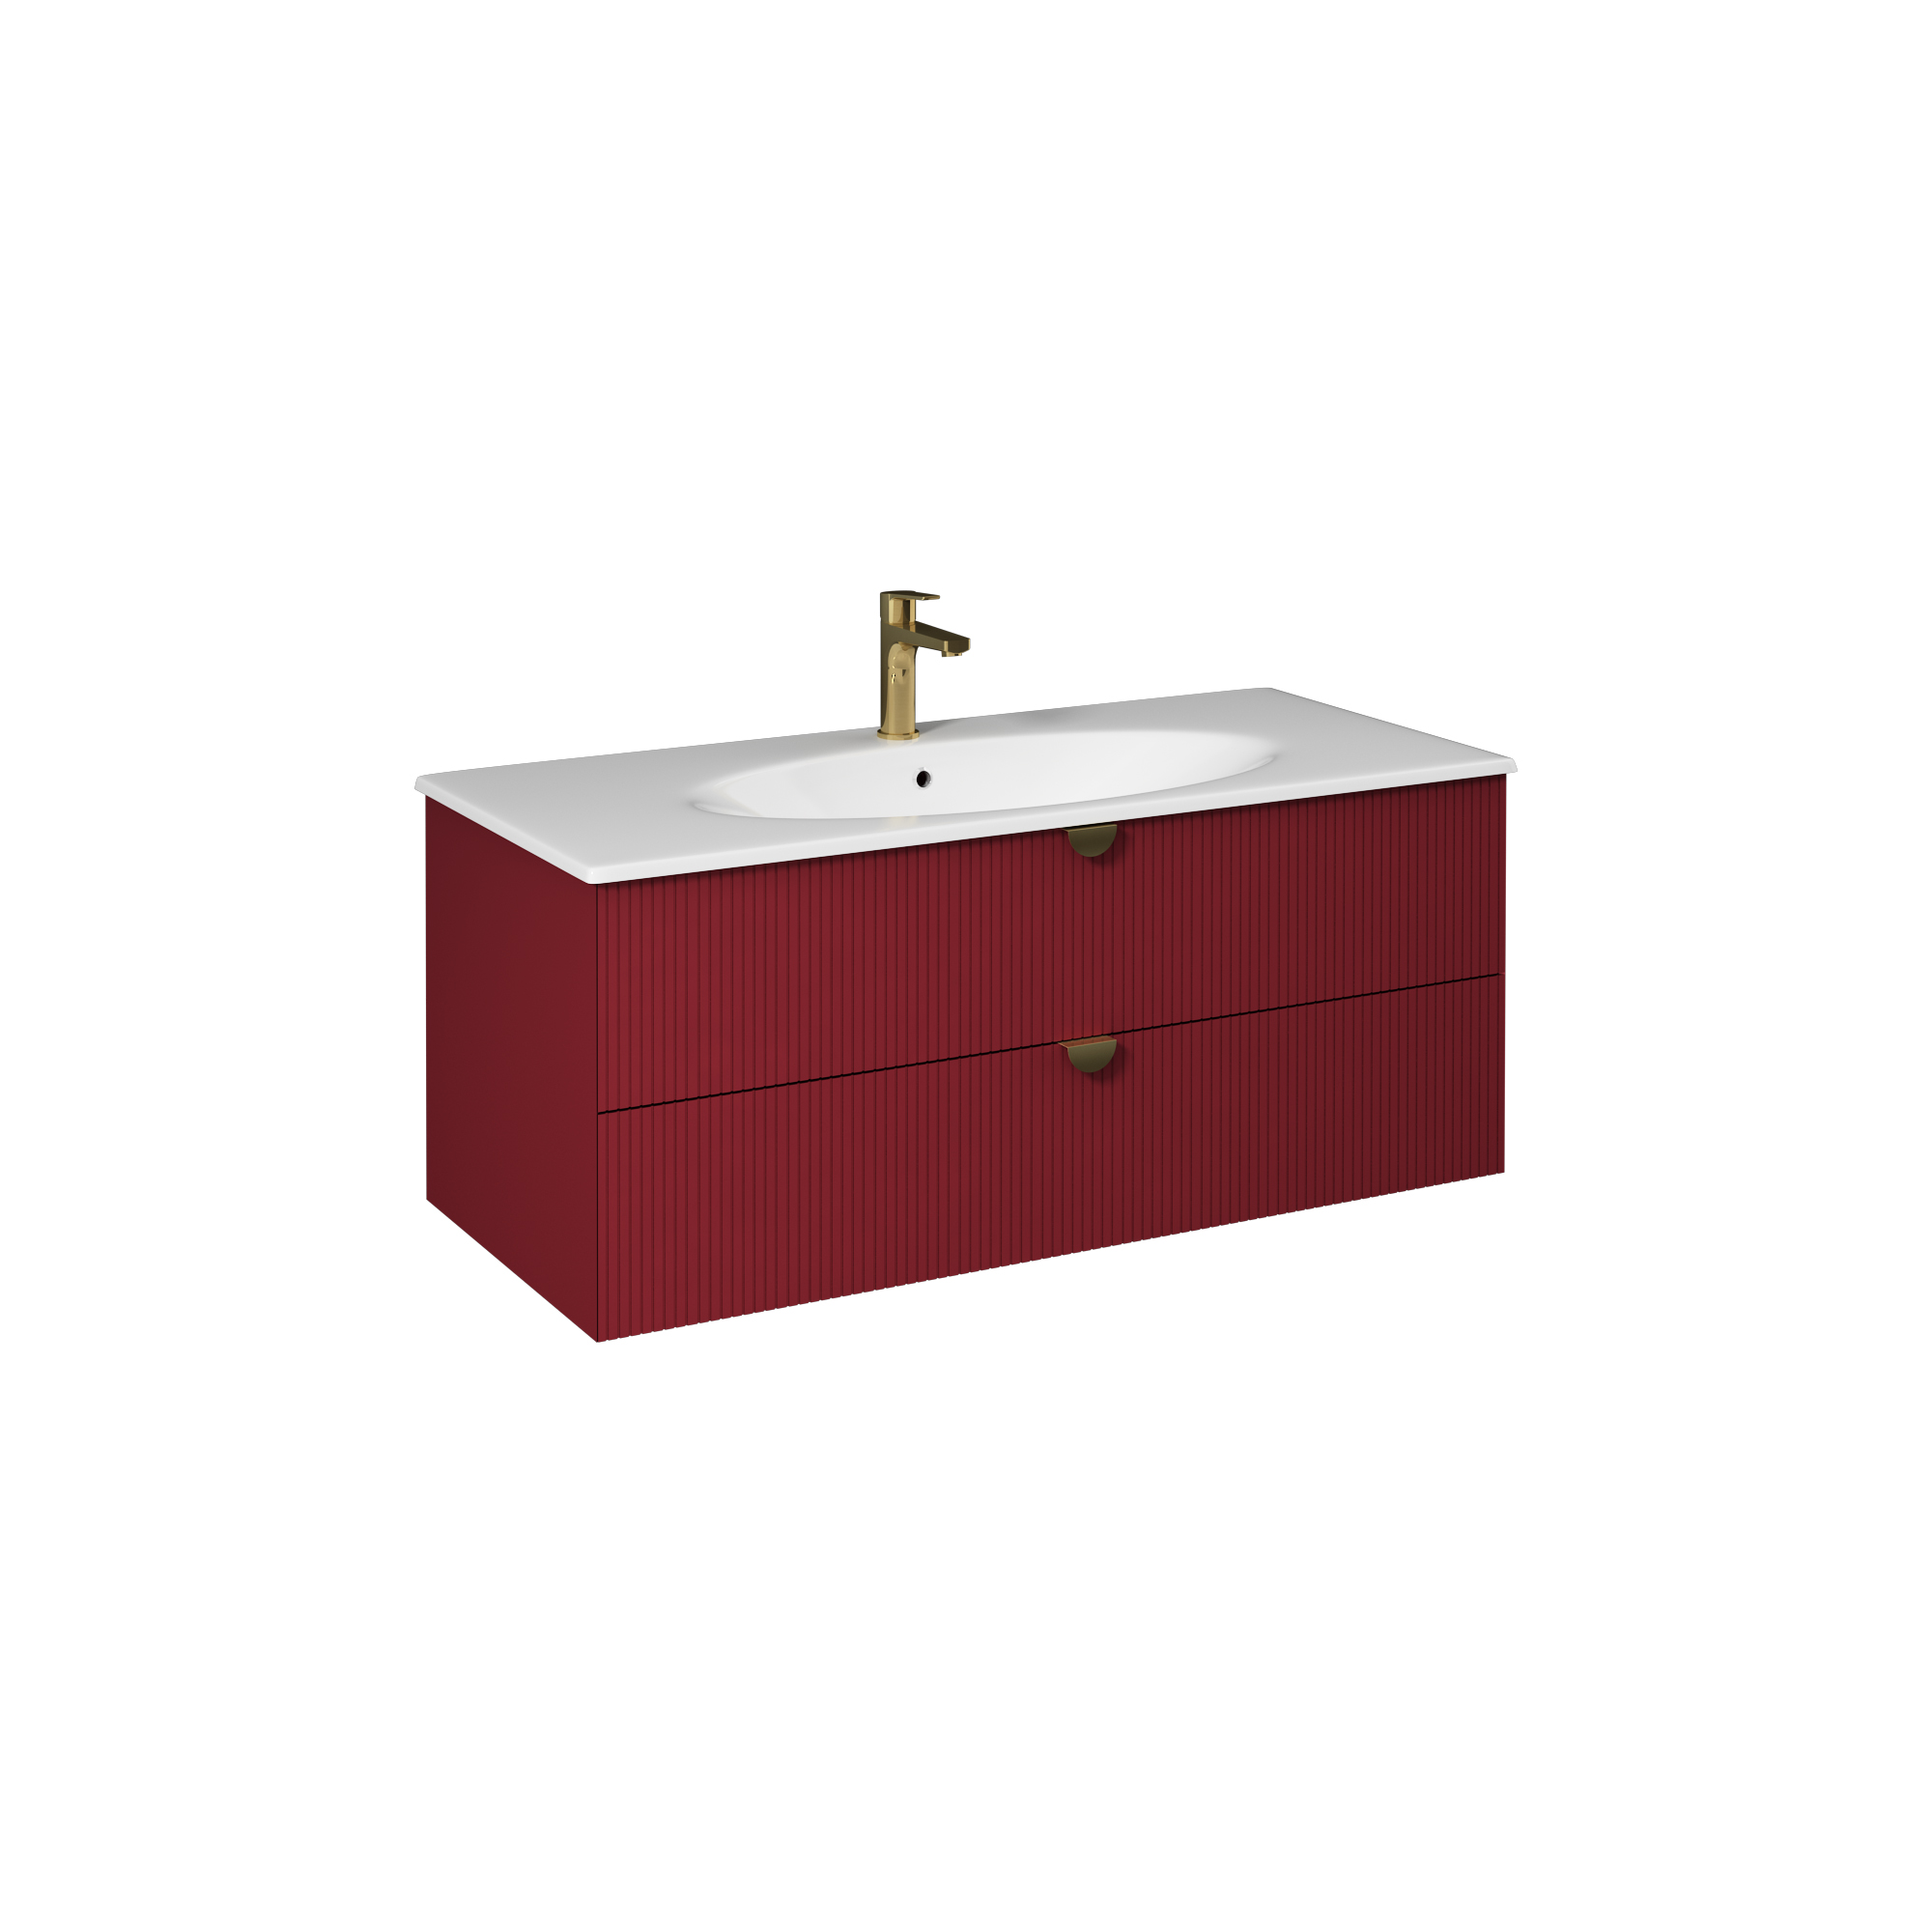 Infinity Washbasin Cabinet, Ruby Red 120 cm